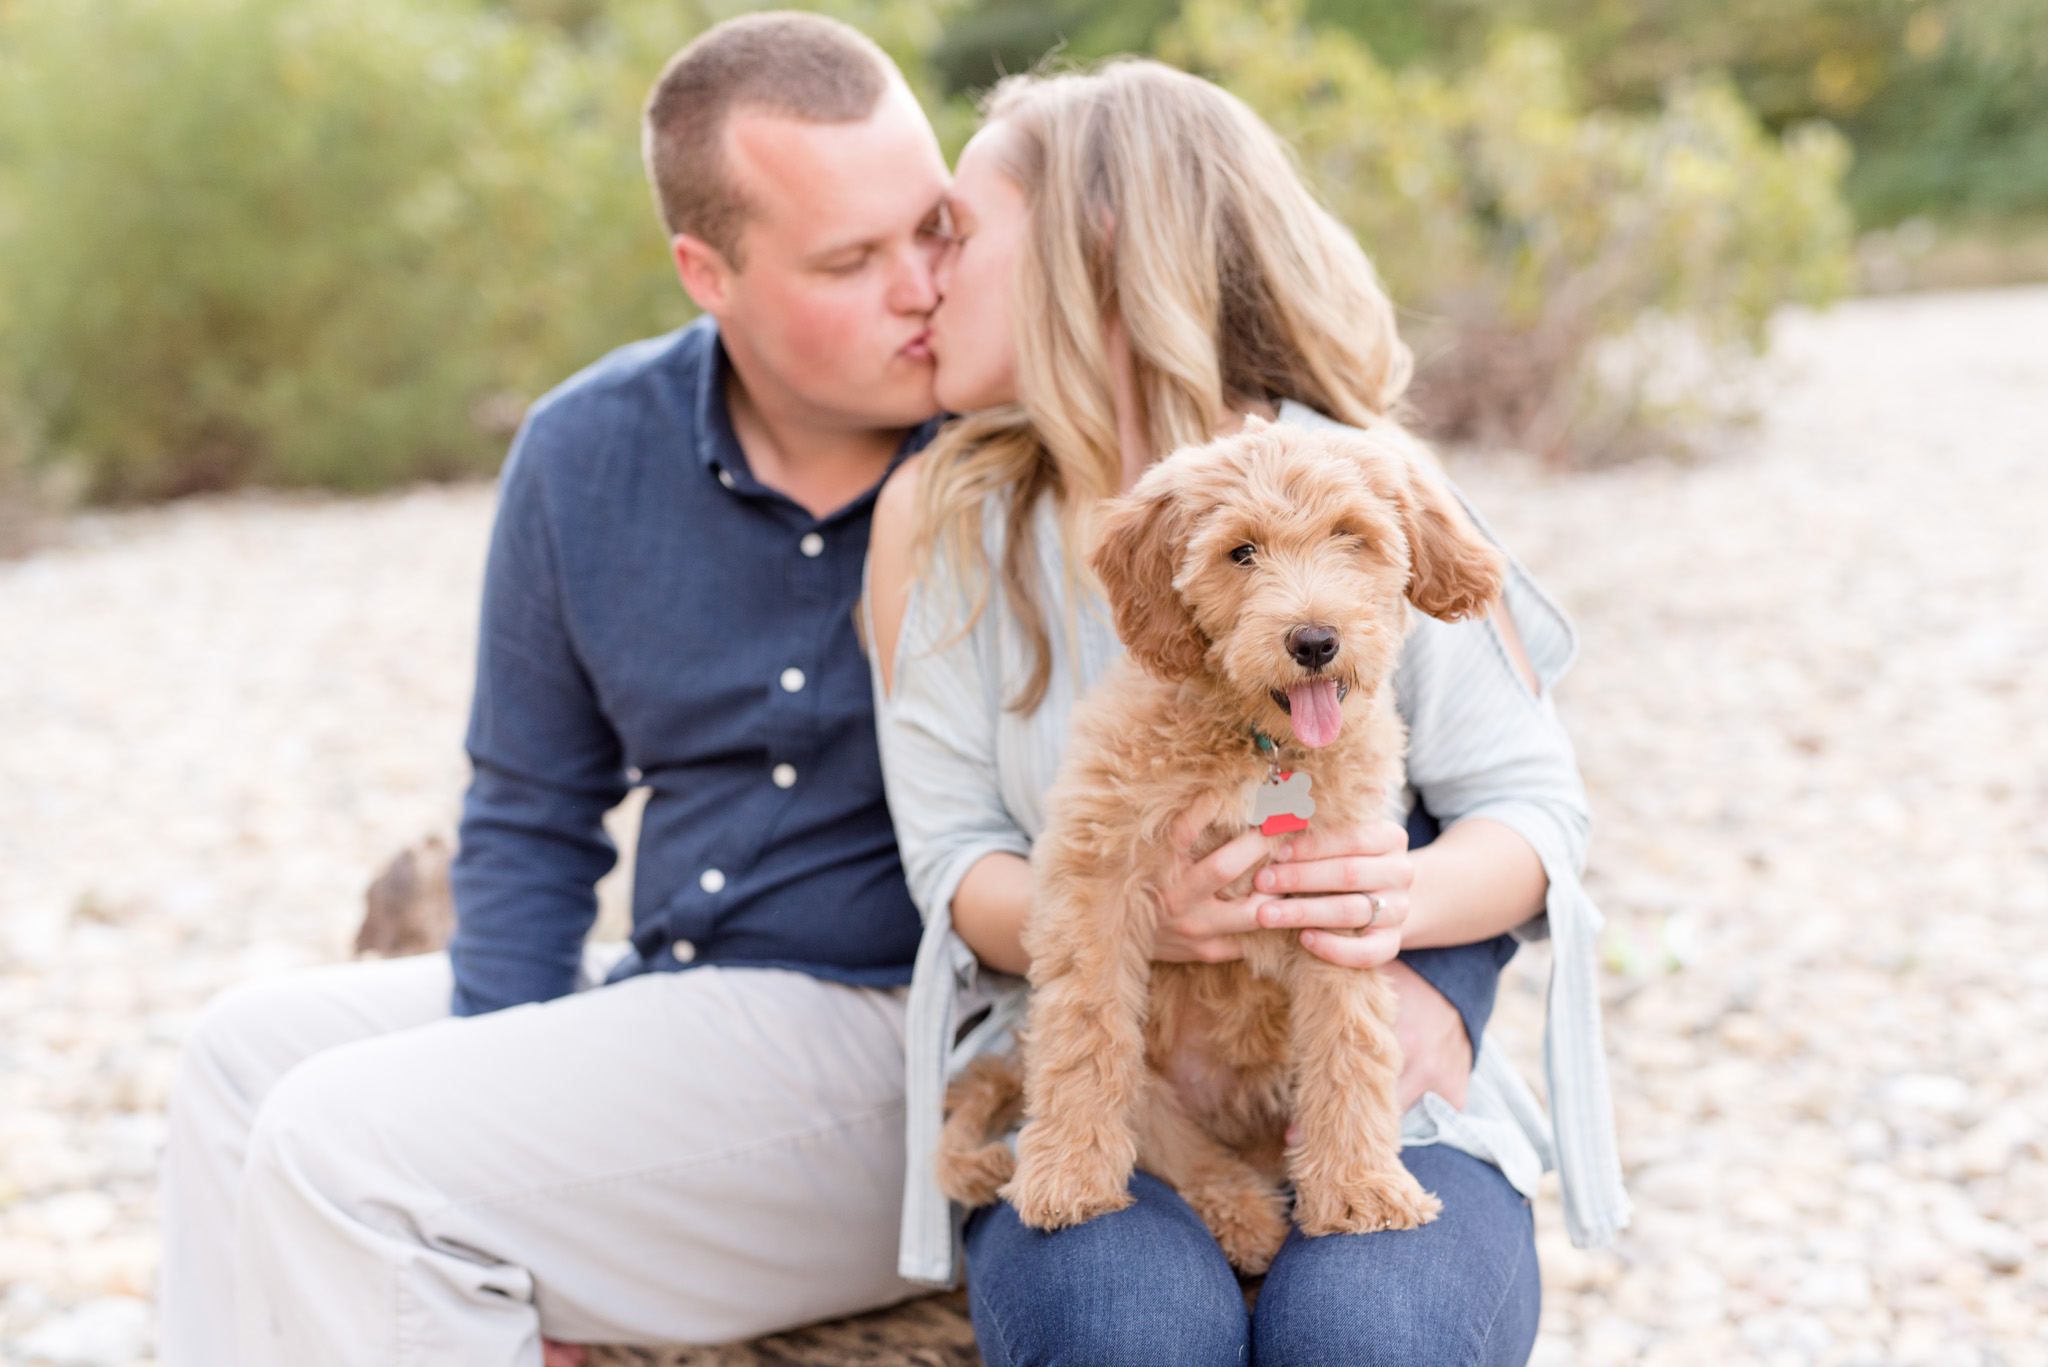 Goldendoodle puppy looks at camera while couple kisses.